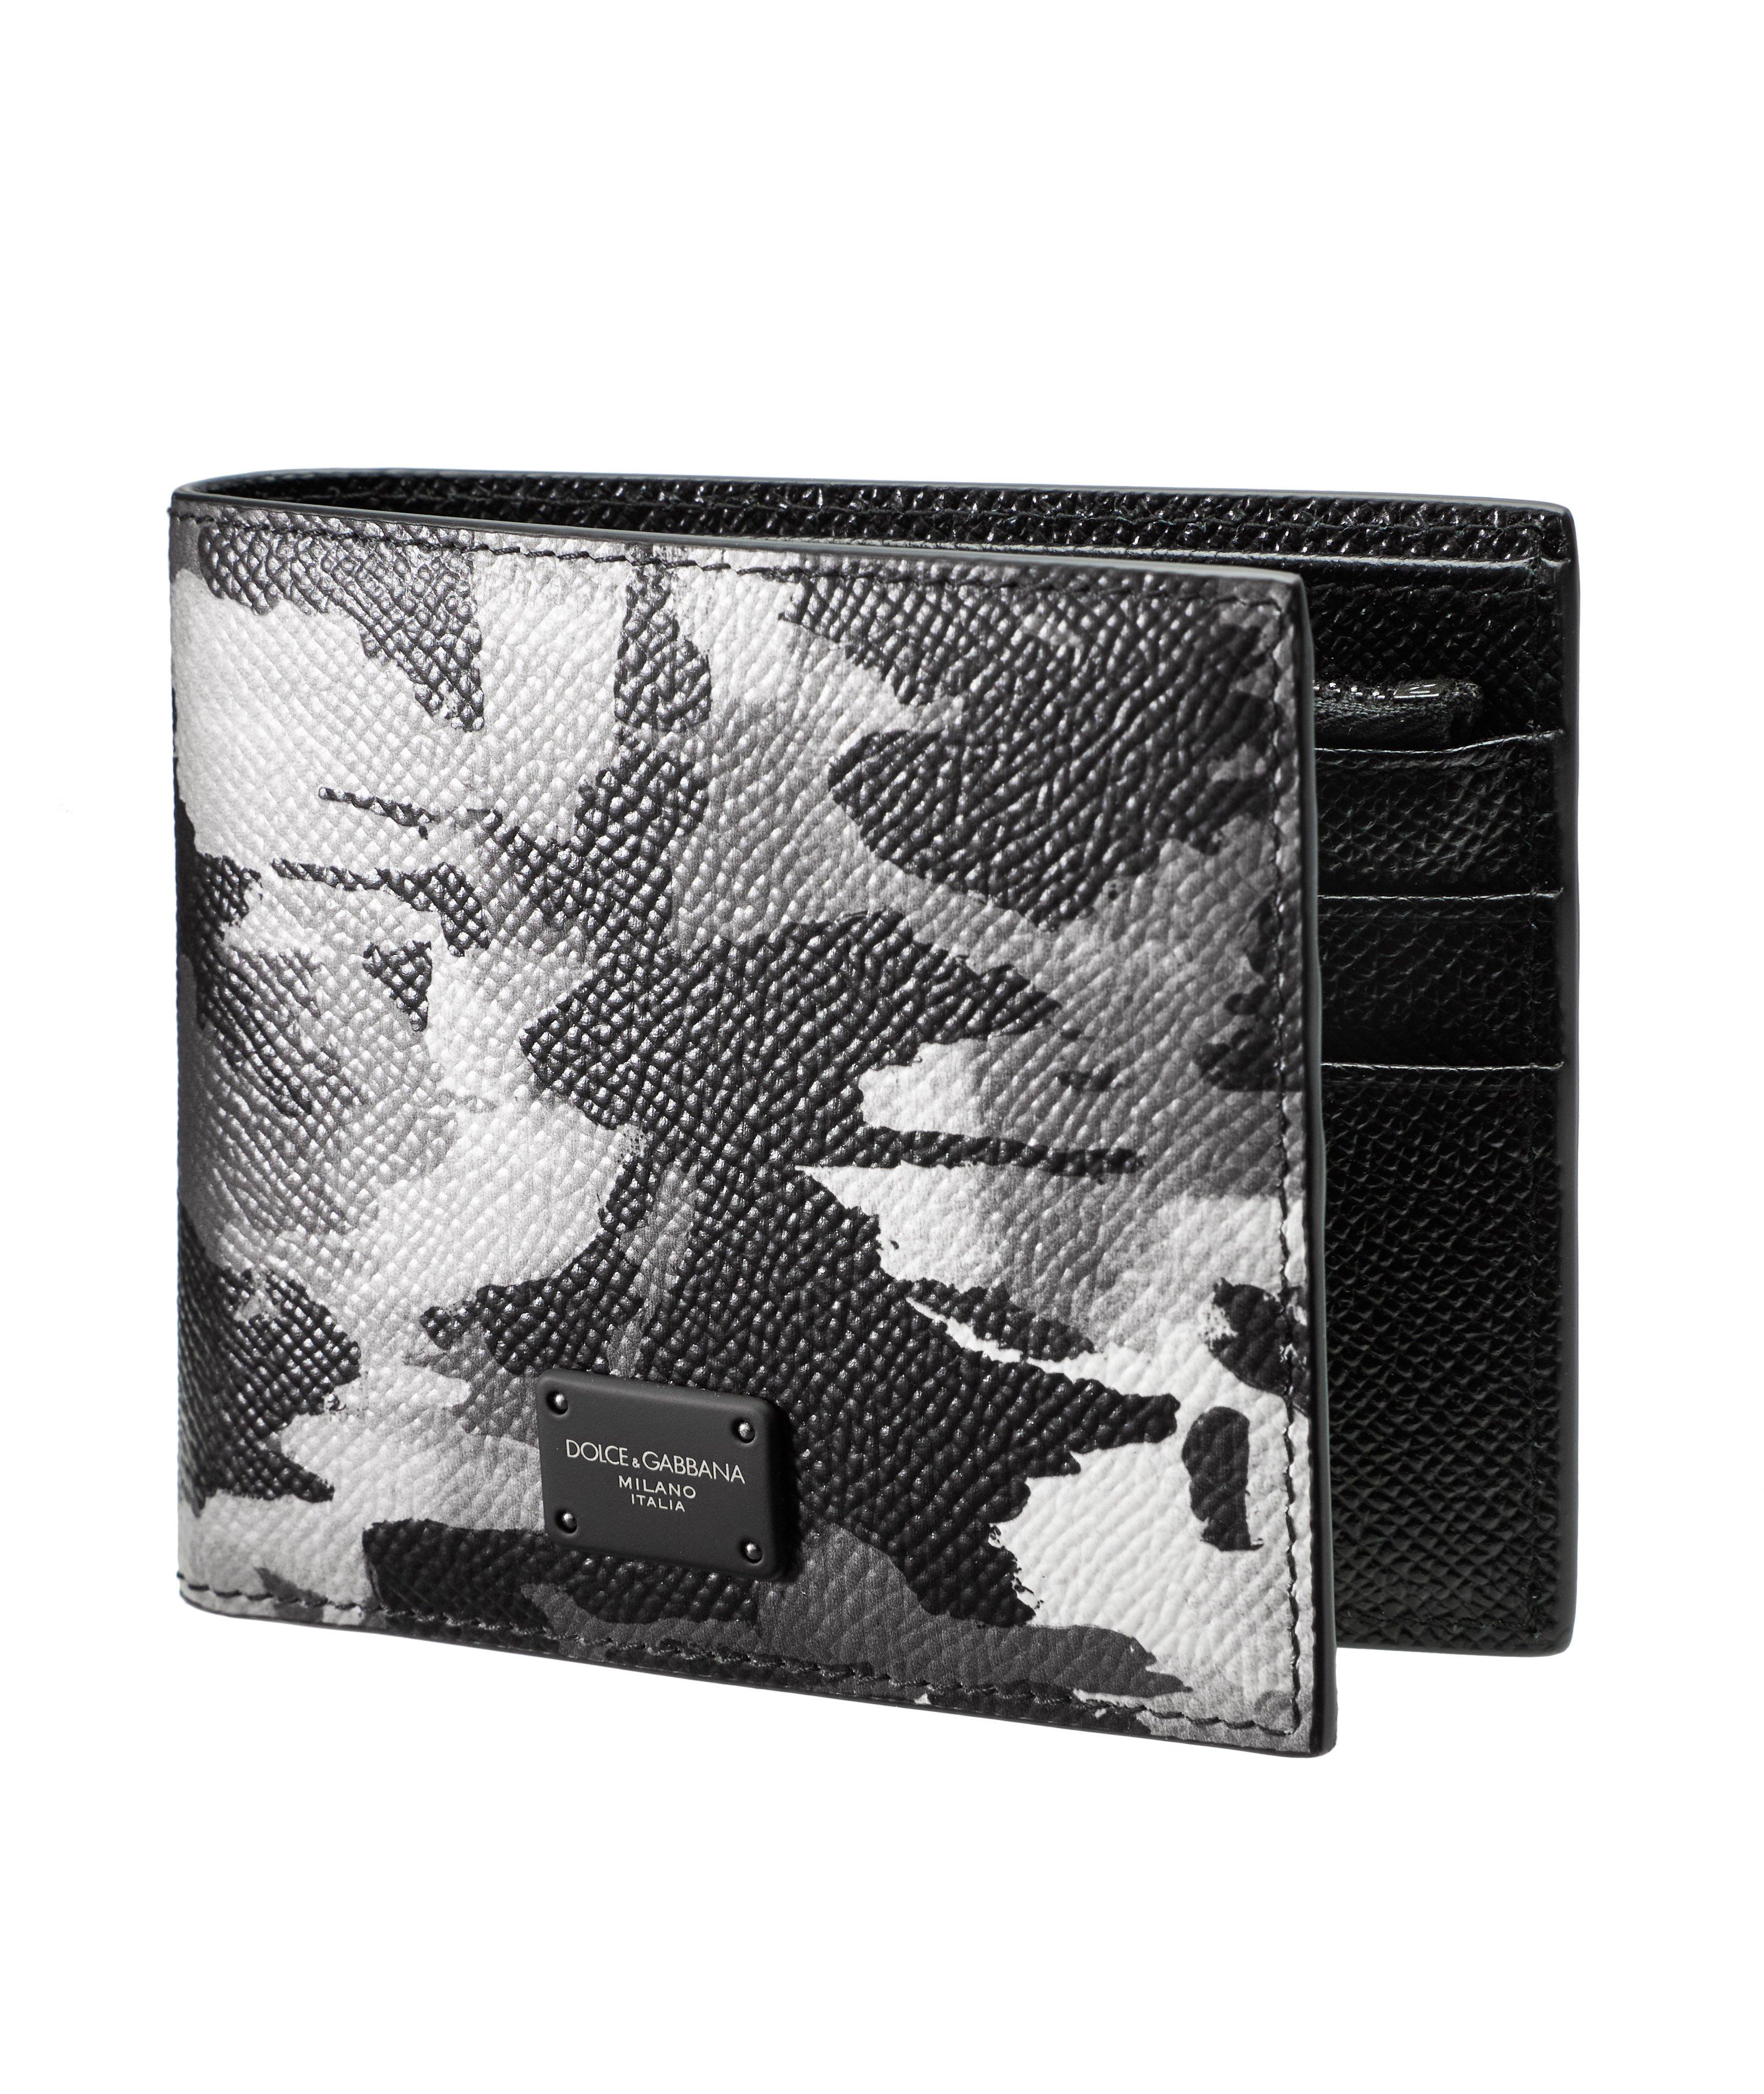 Camouflage Leather Billfold Wallet image 0